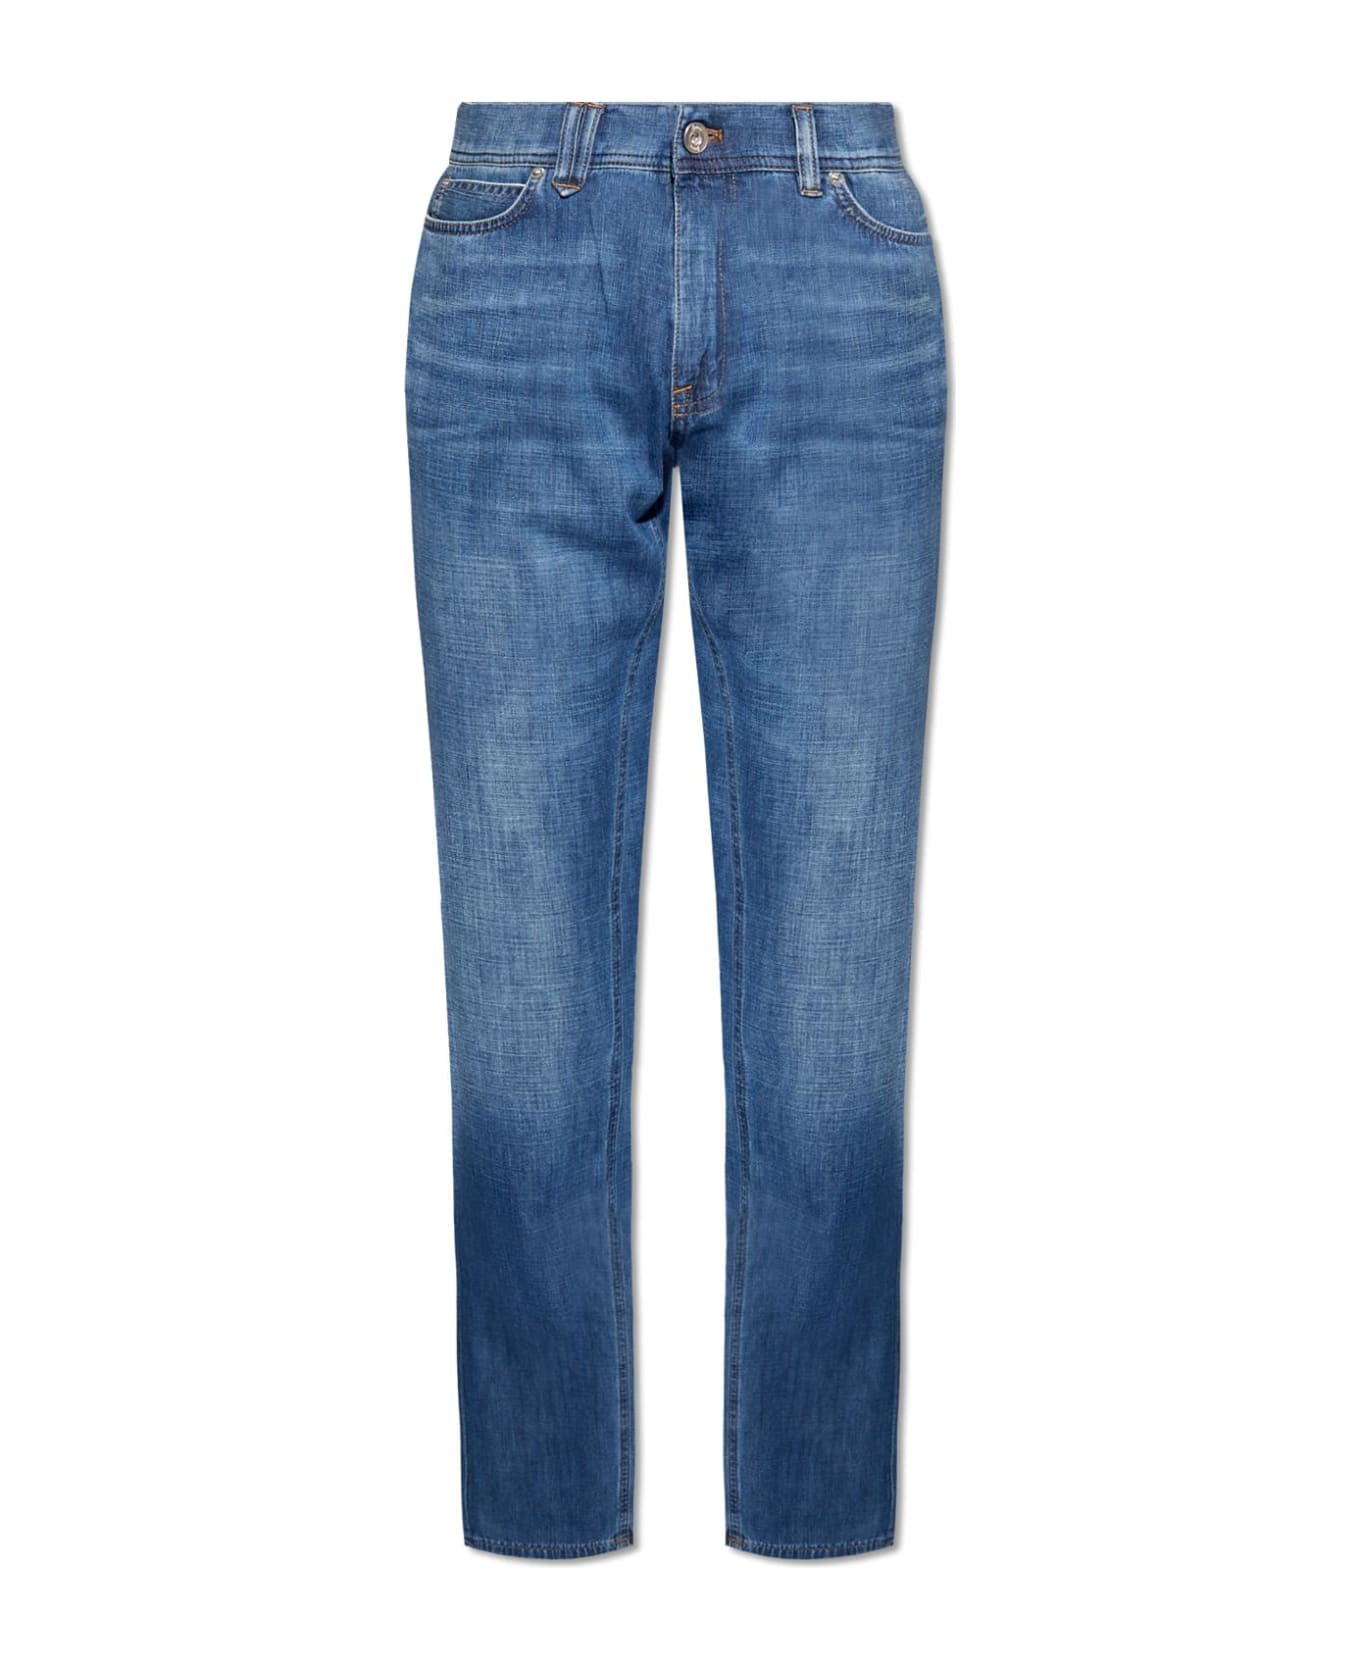 Brioni Jeans With Straight Legs - AZURE